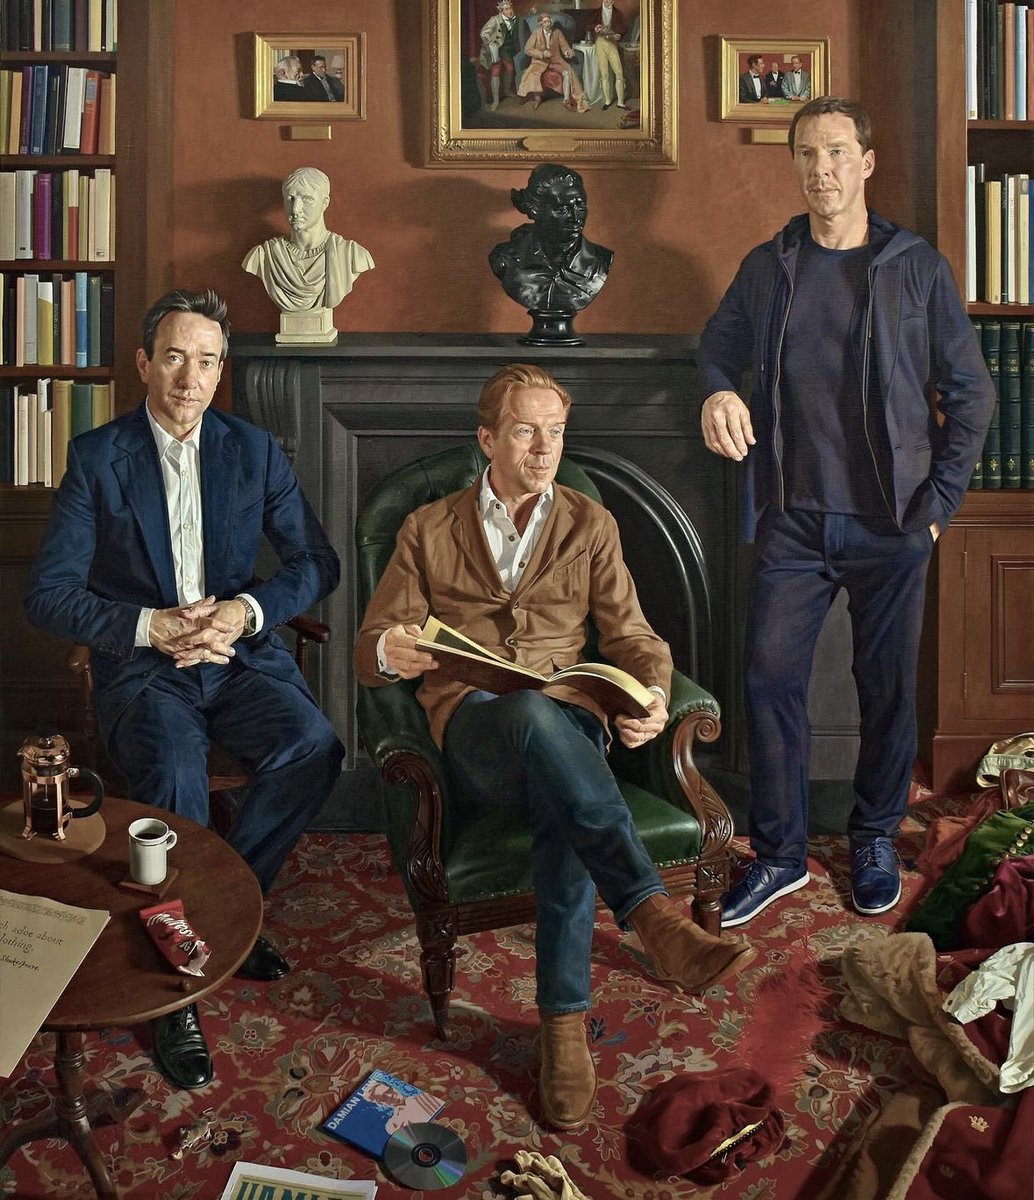 Great portrait painting of Damian Lewis, Matthew Macfadyen and Benedict Cumberbatch. Get the story behind the canvas here: damian-lewis.com/?p=53621 #DamianLewis #MatthewMacfadyen #BenedictCumberbatch #BenjaminSullivan